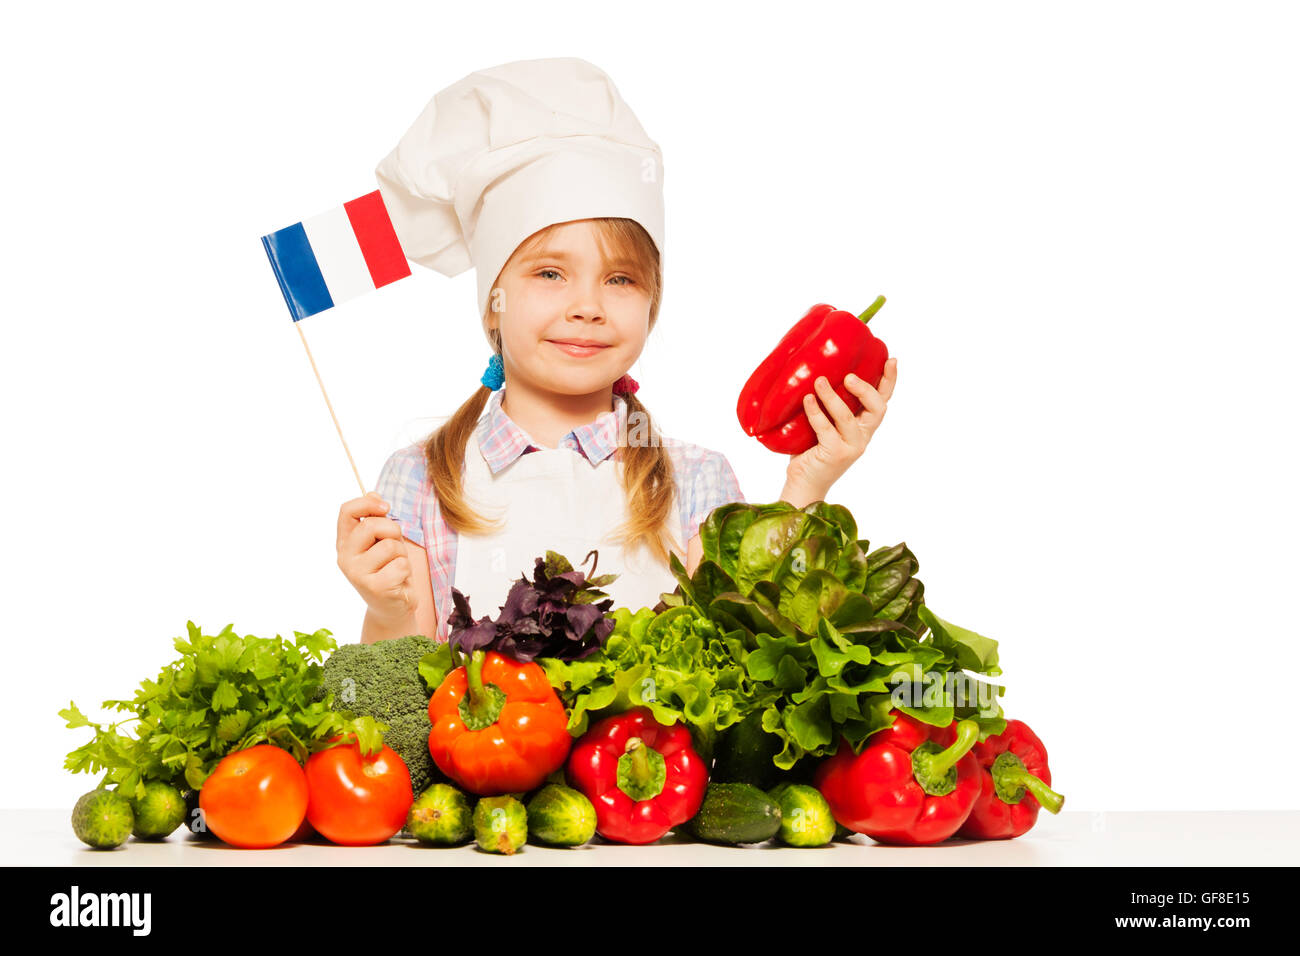 Smiling French girl preparing healthy food Stock Photo